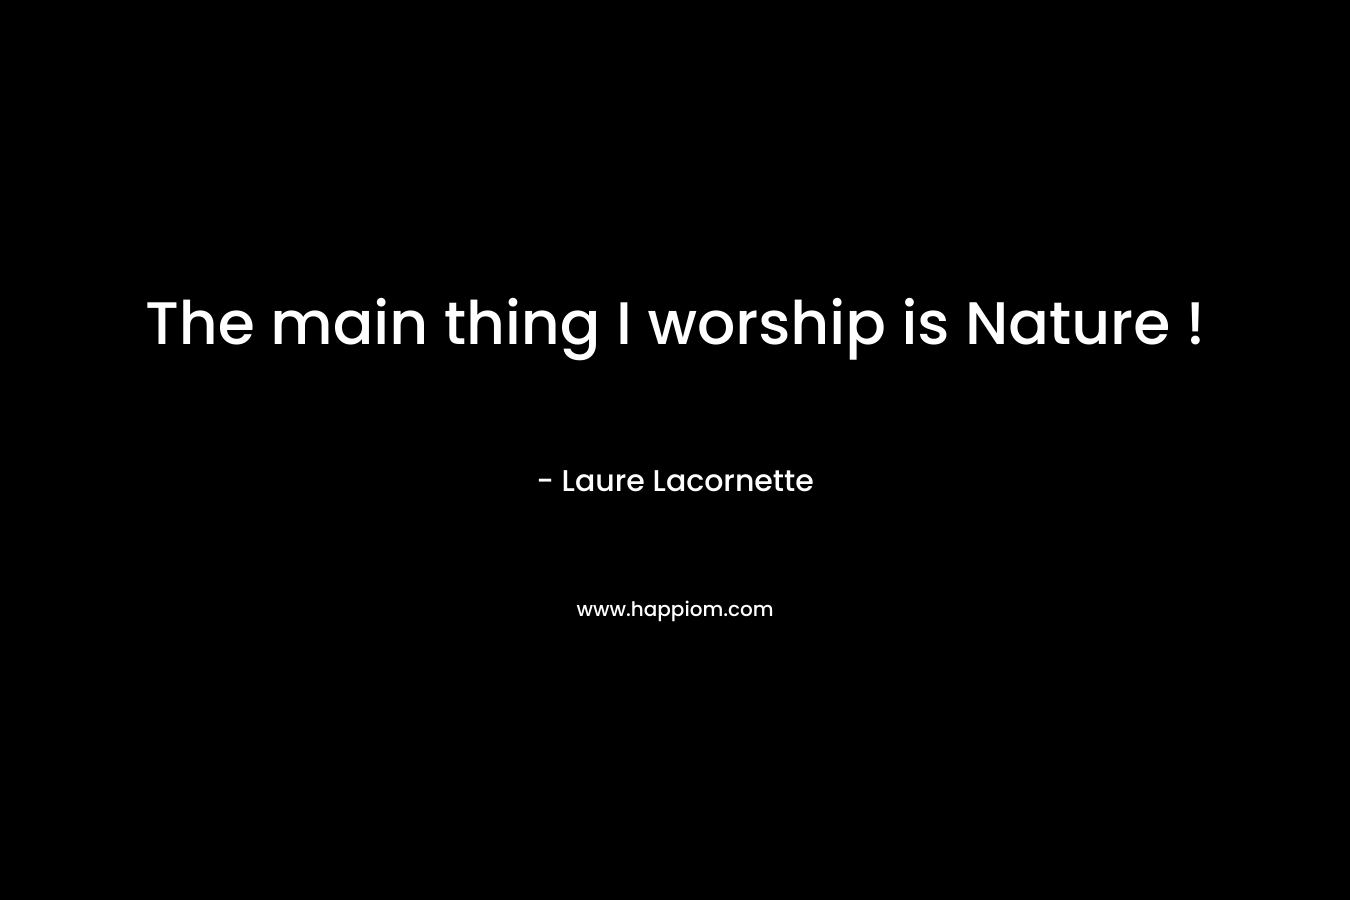 The main thing I worship is Nature ! – Laure Lacornette